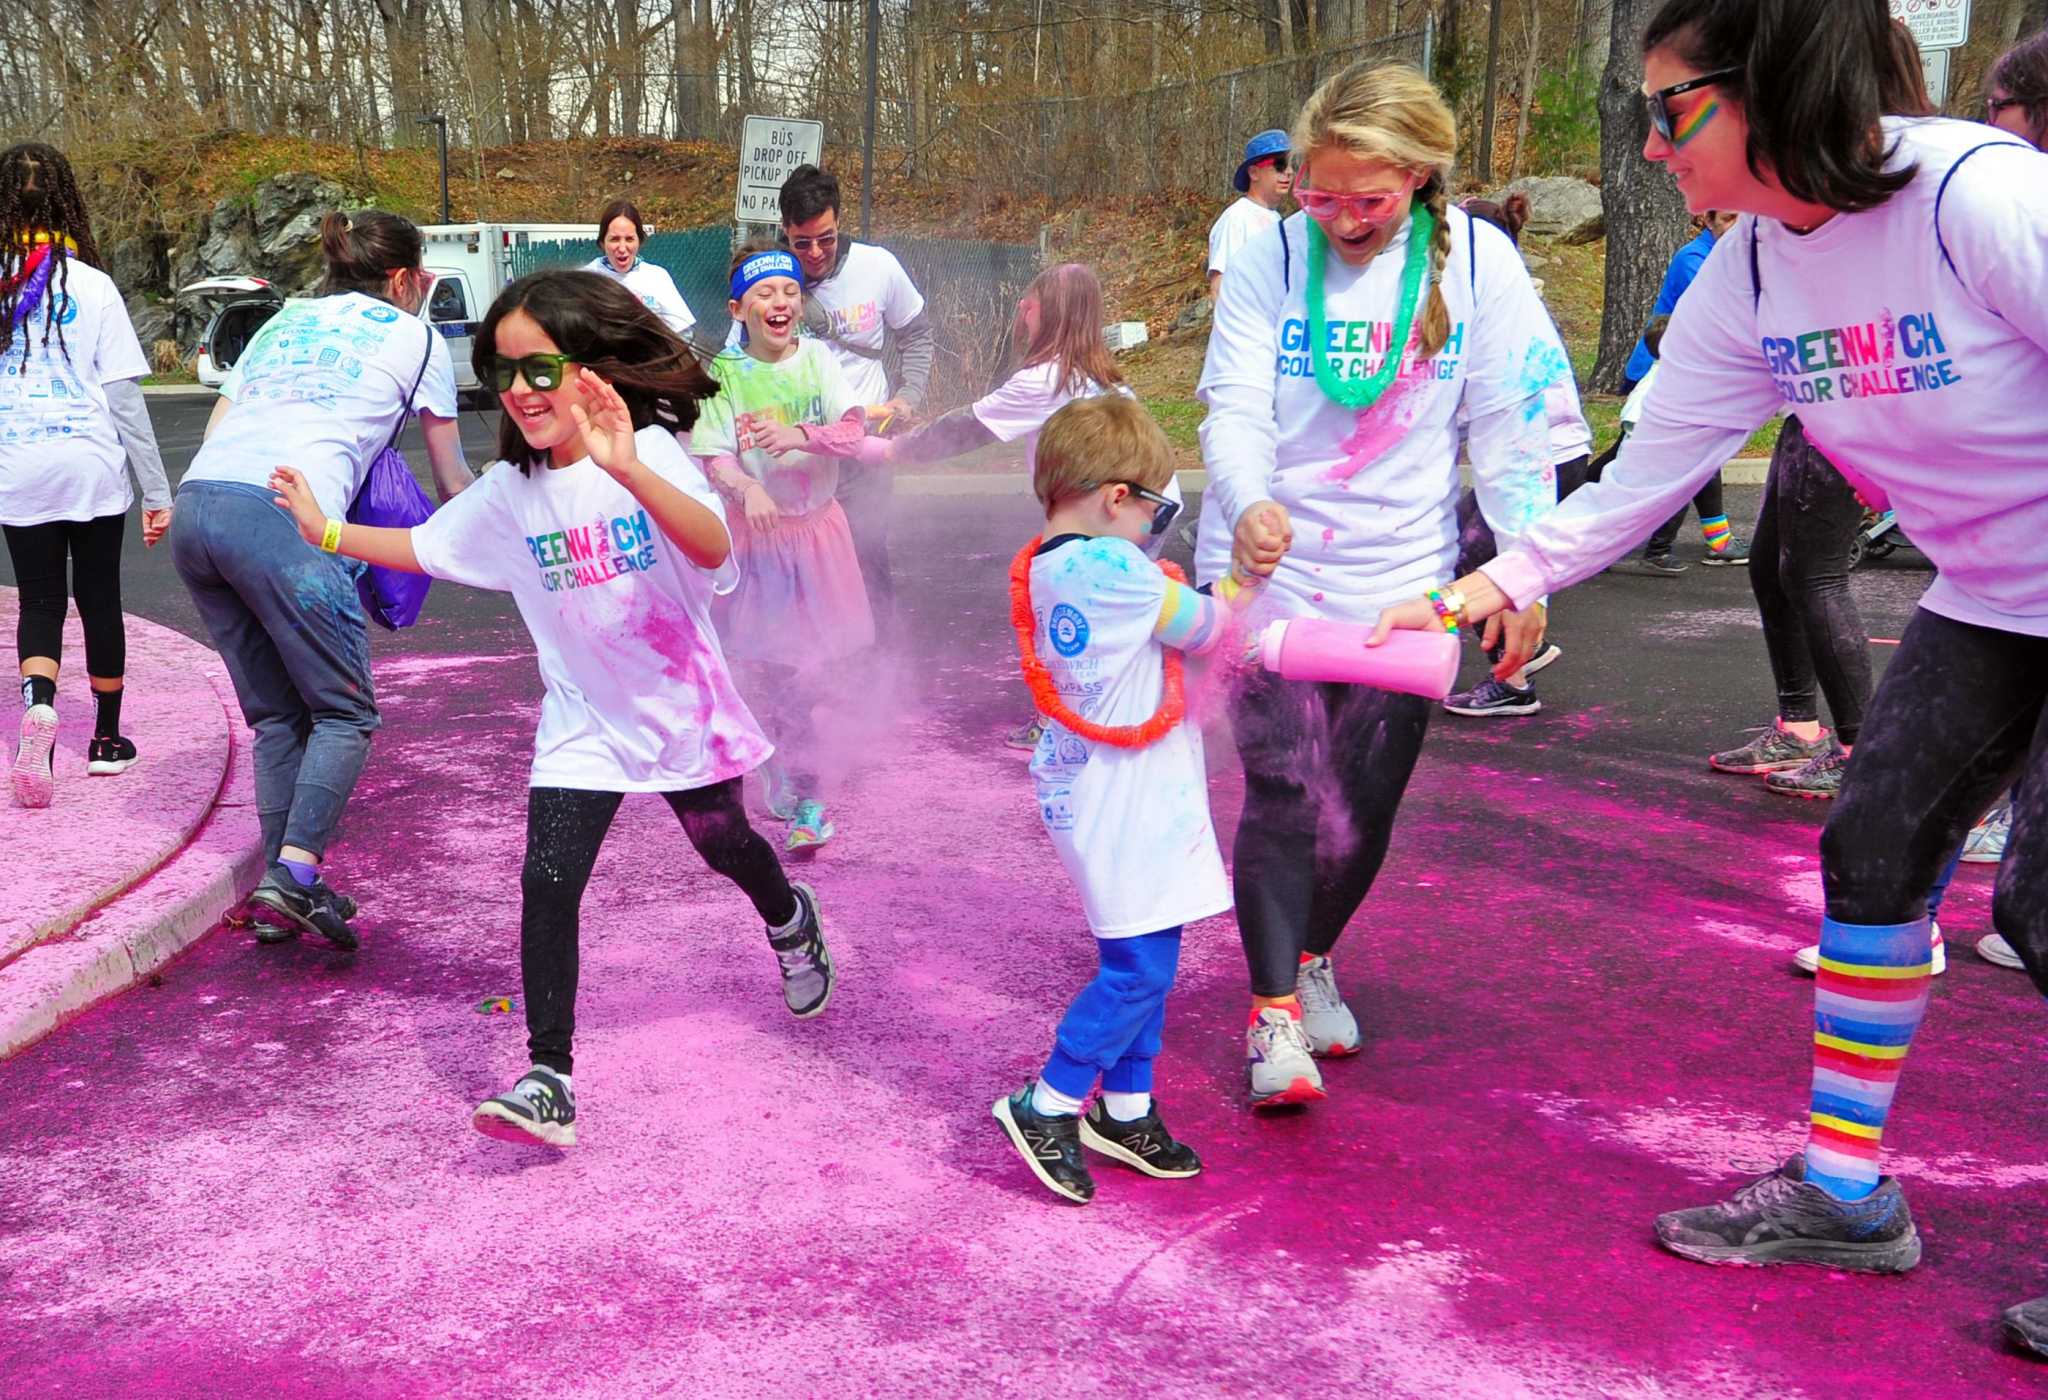 In Photos: Color run in Greenwich turns kids, adults into rainbows — and  all for a good cause